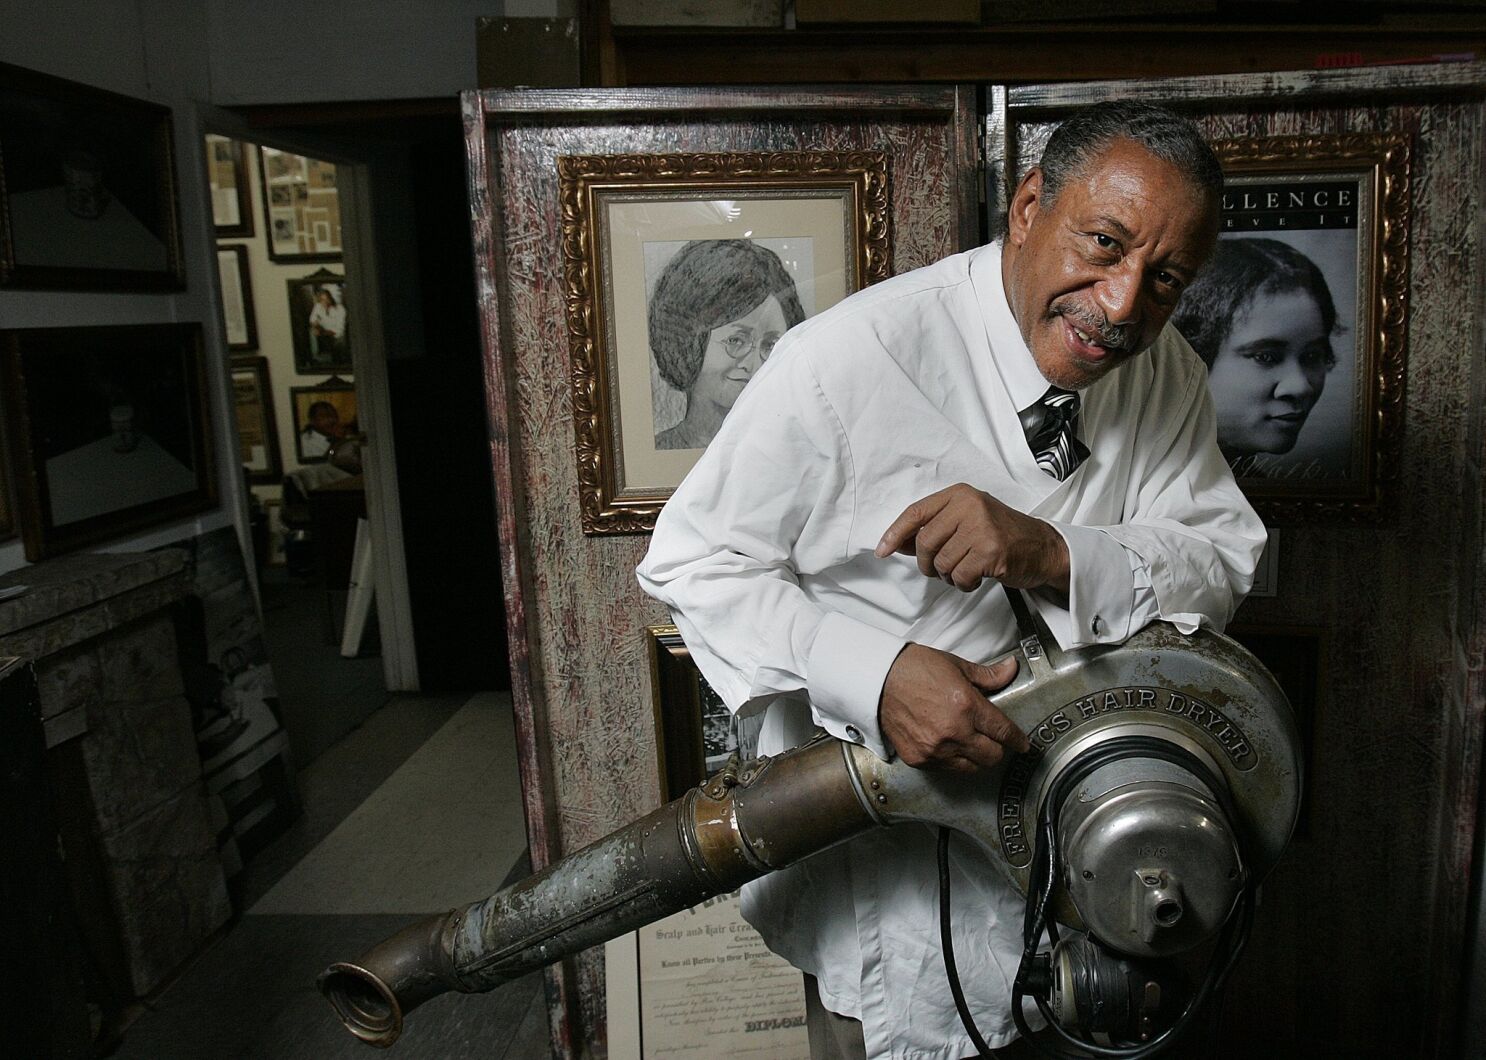 Local barber a pioneer in black hair care - The San Diego Union-Tribune